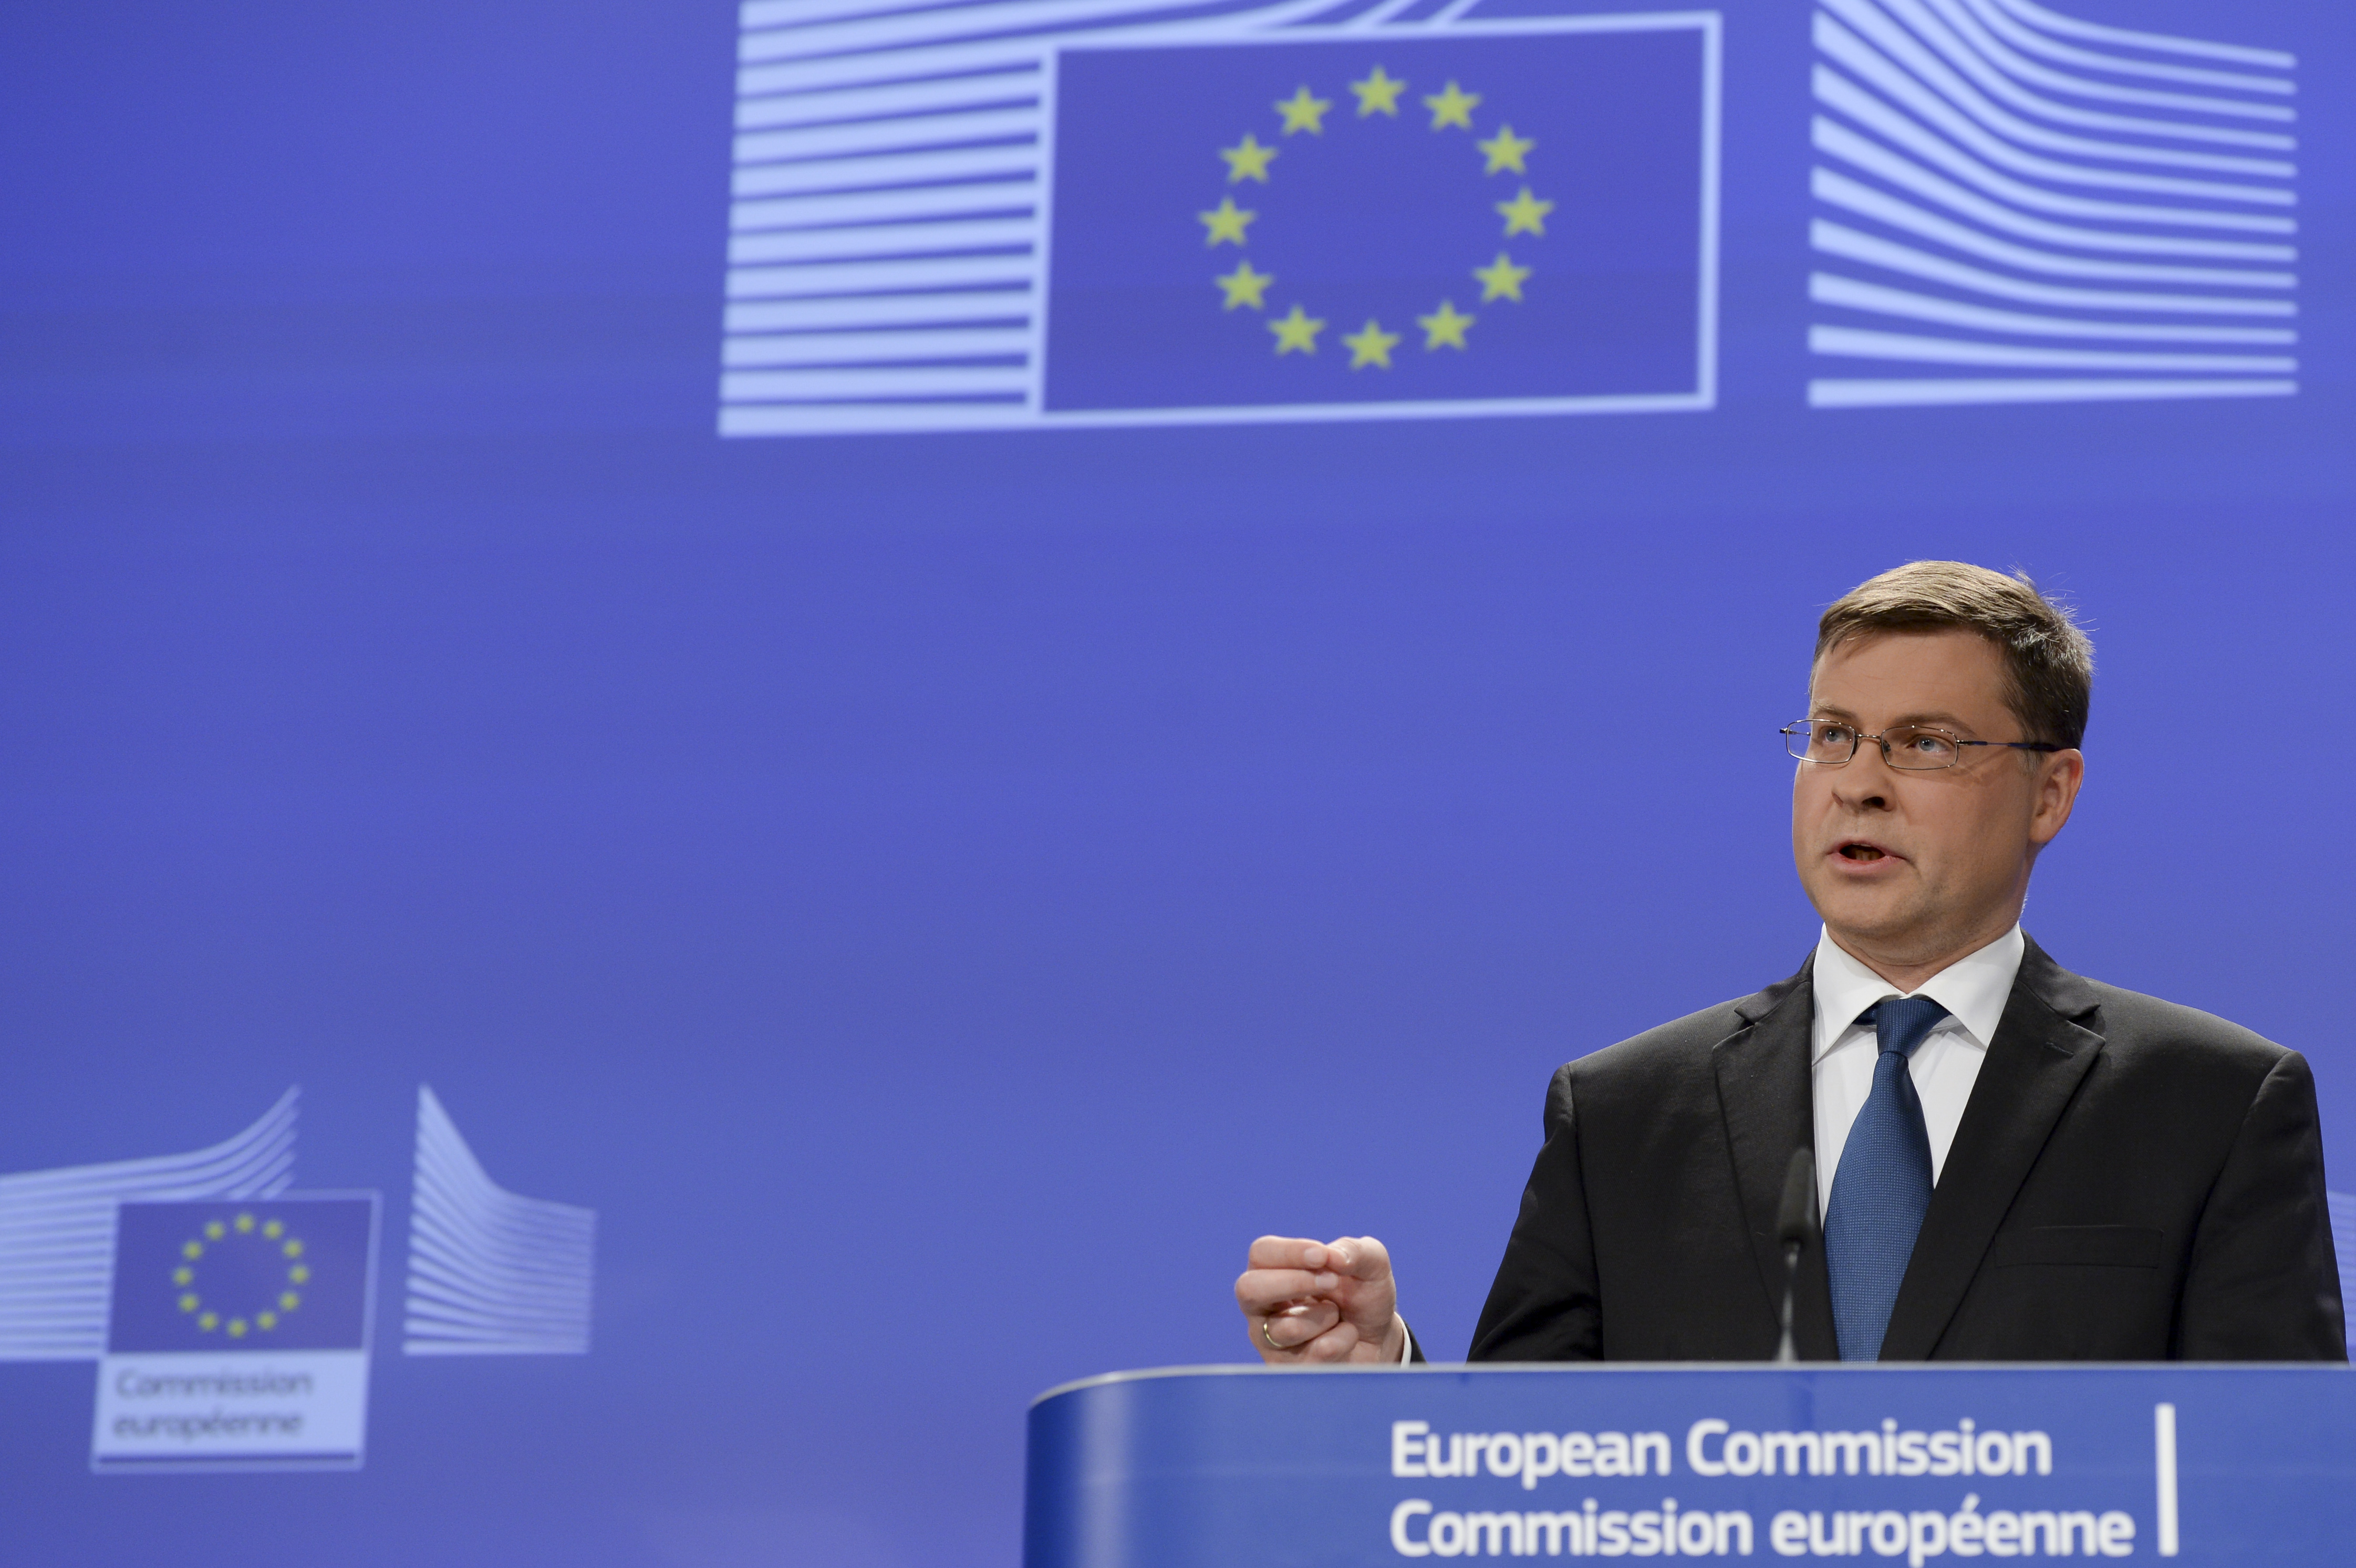 Vice-President of the European Commission Valdis Dombrovskis